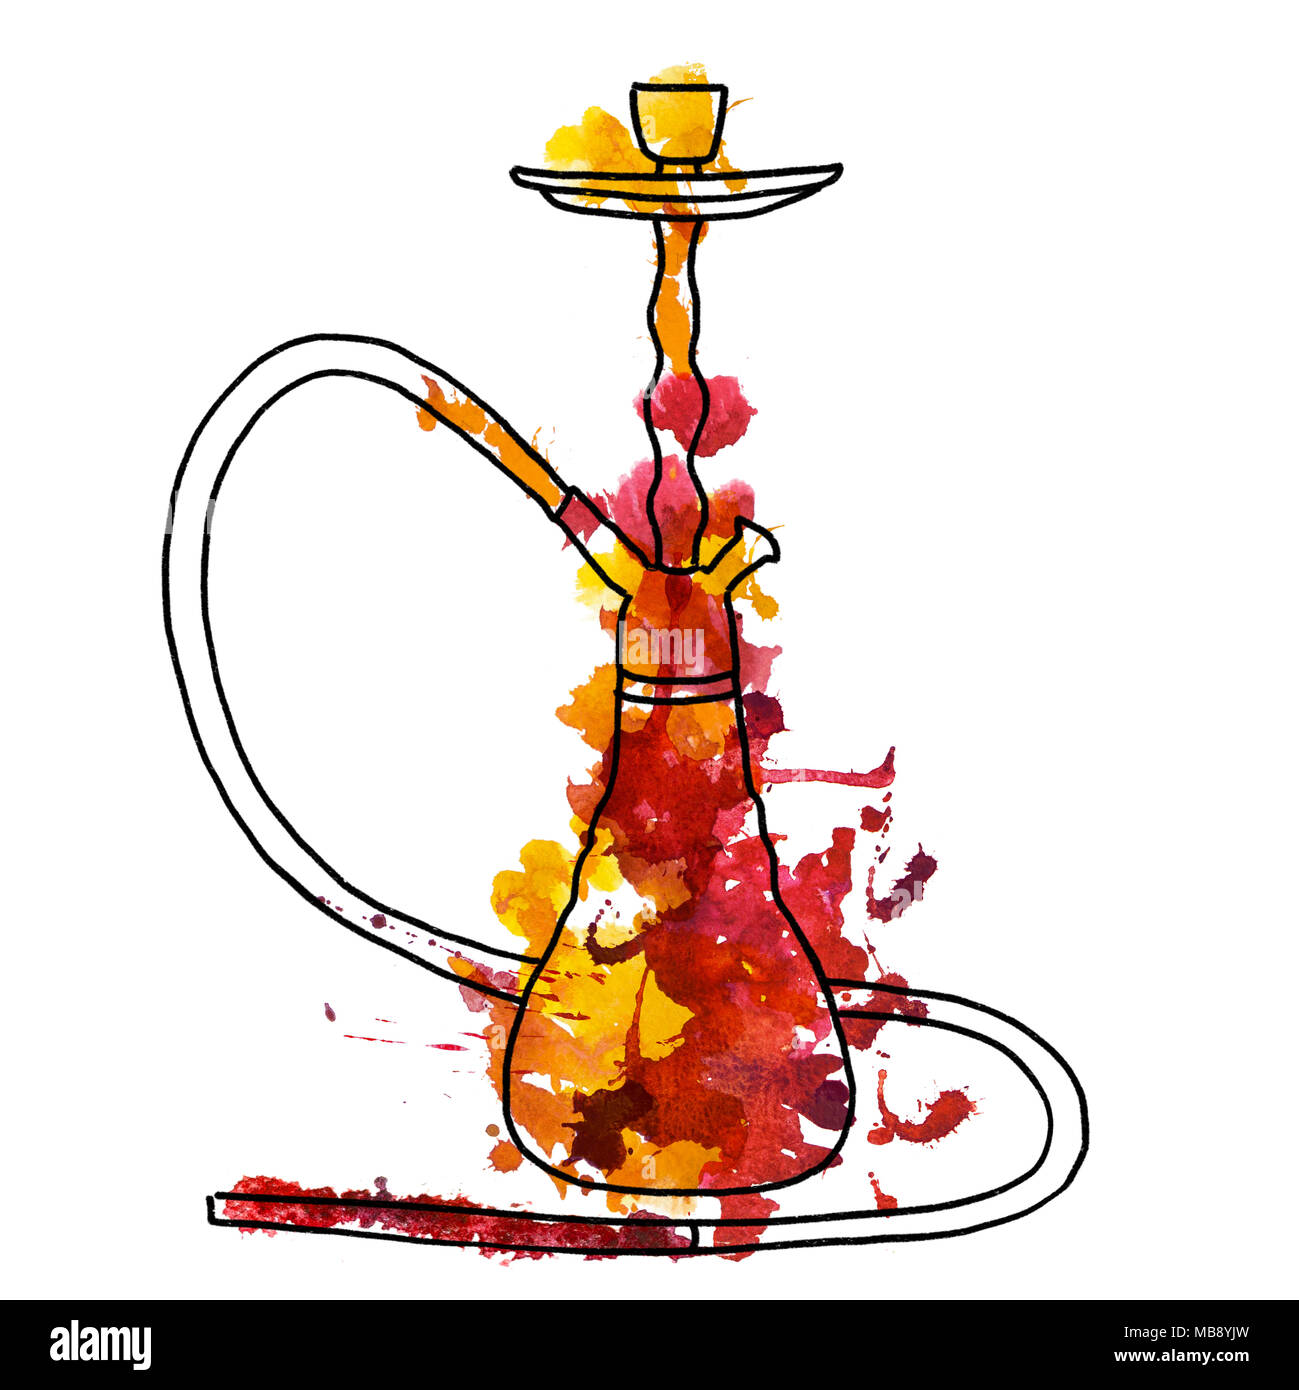 2d hand drawn illustration for lounge bar. Red yellow watercolor splash blot in shape of oriental hookah. Sketch, doodle isolated on white background. Stock Photo